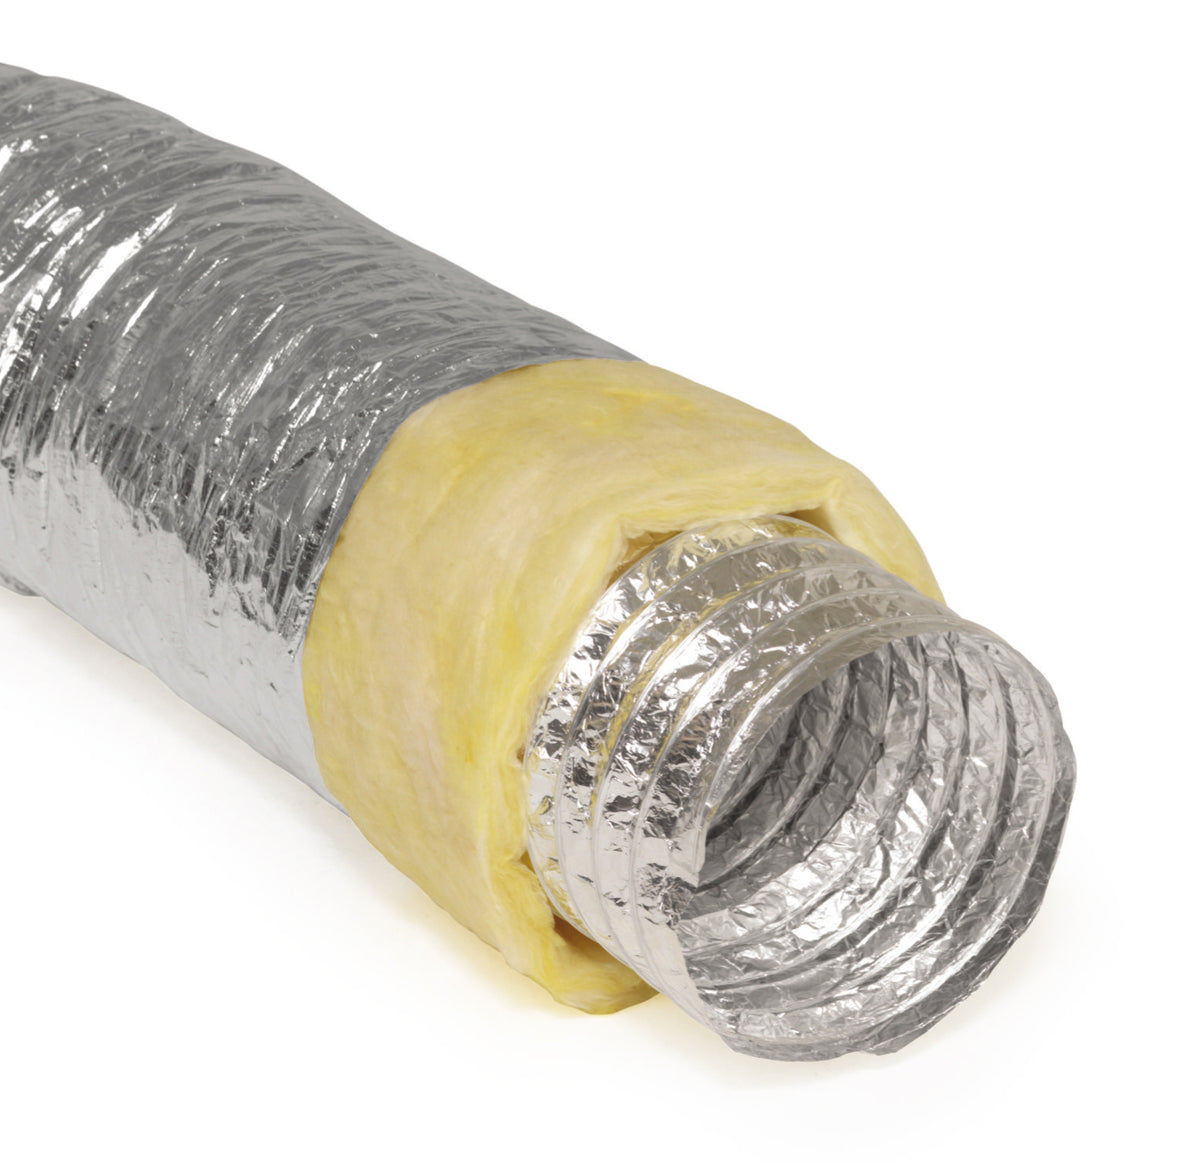 16&quot; Inch Aluminum Hose Flexible Insulated R-4.2 Air Duct Pipe for Rigid HVAC Flex Ductwork Insulation - 25&#39; Feet Long